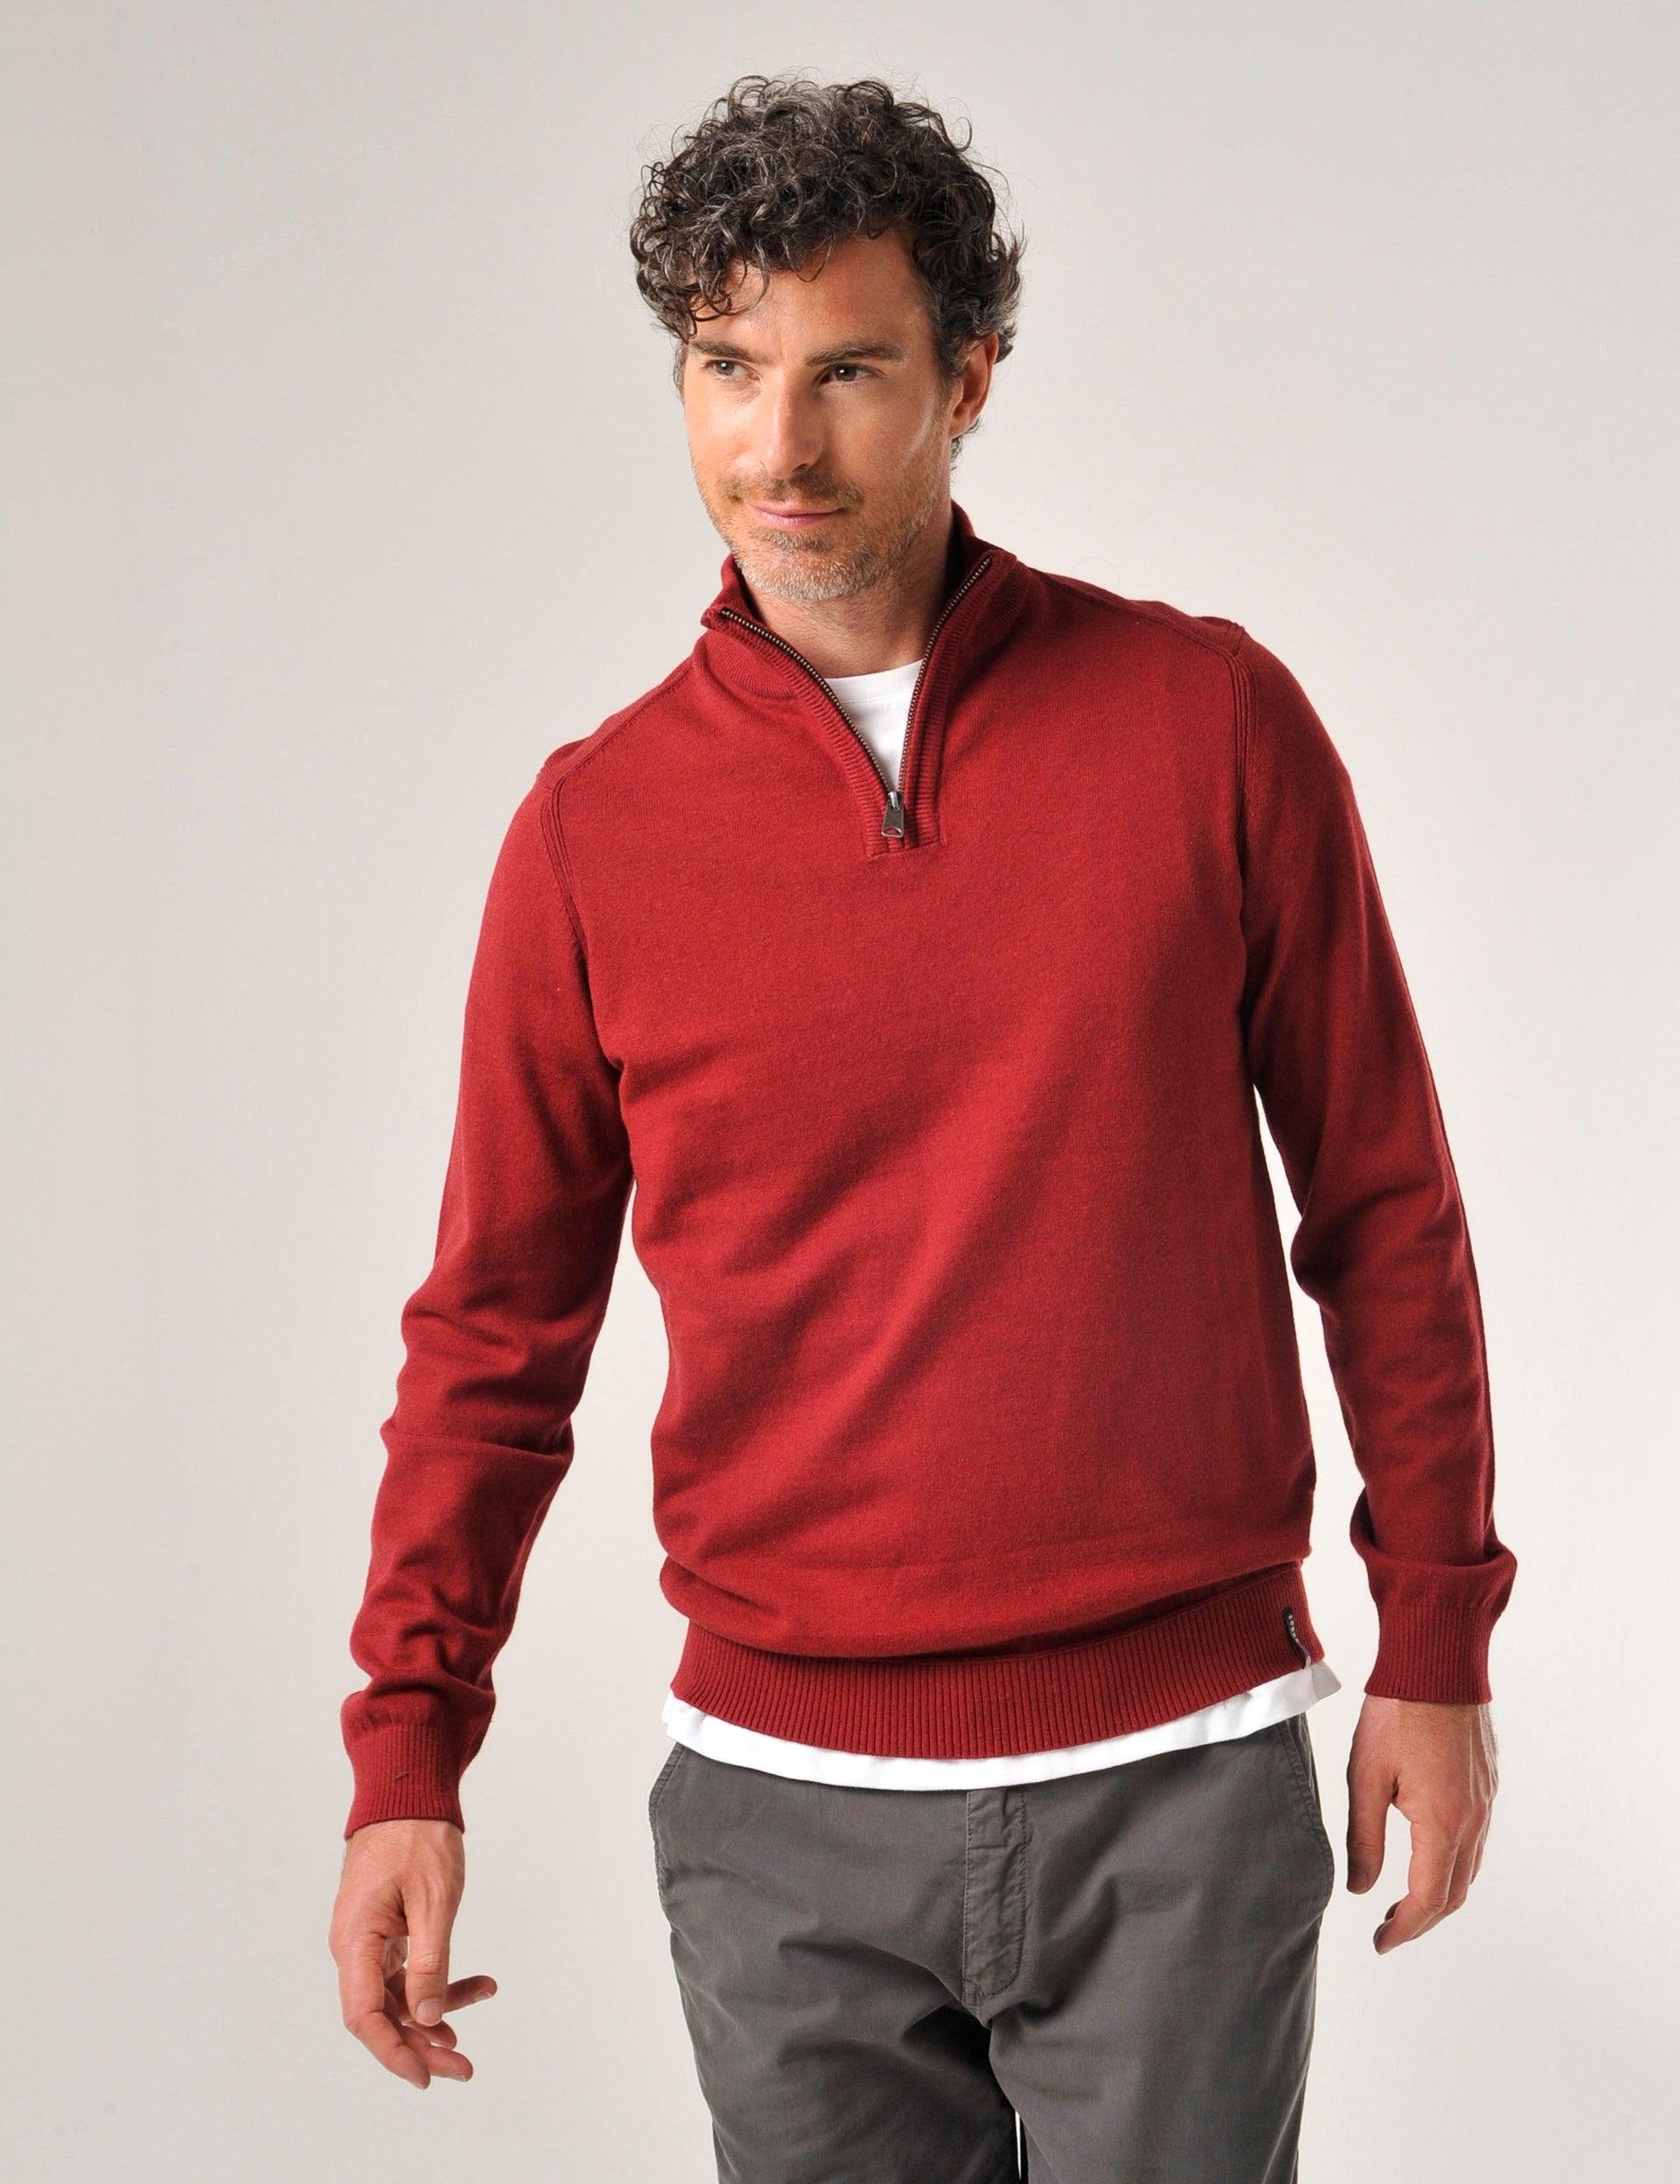 Tiverton Jumper Deep Red by BURGS